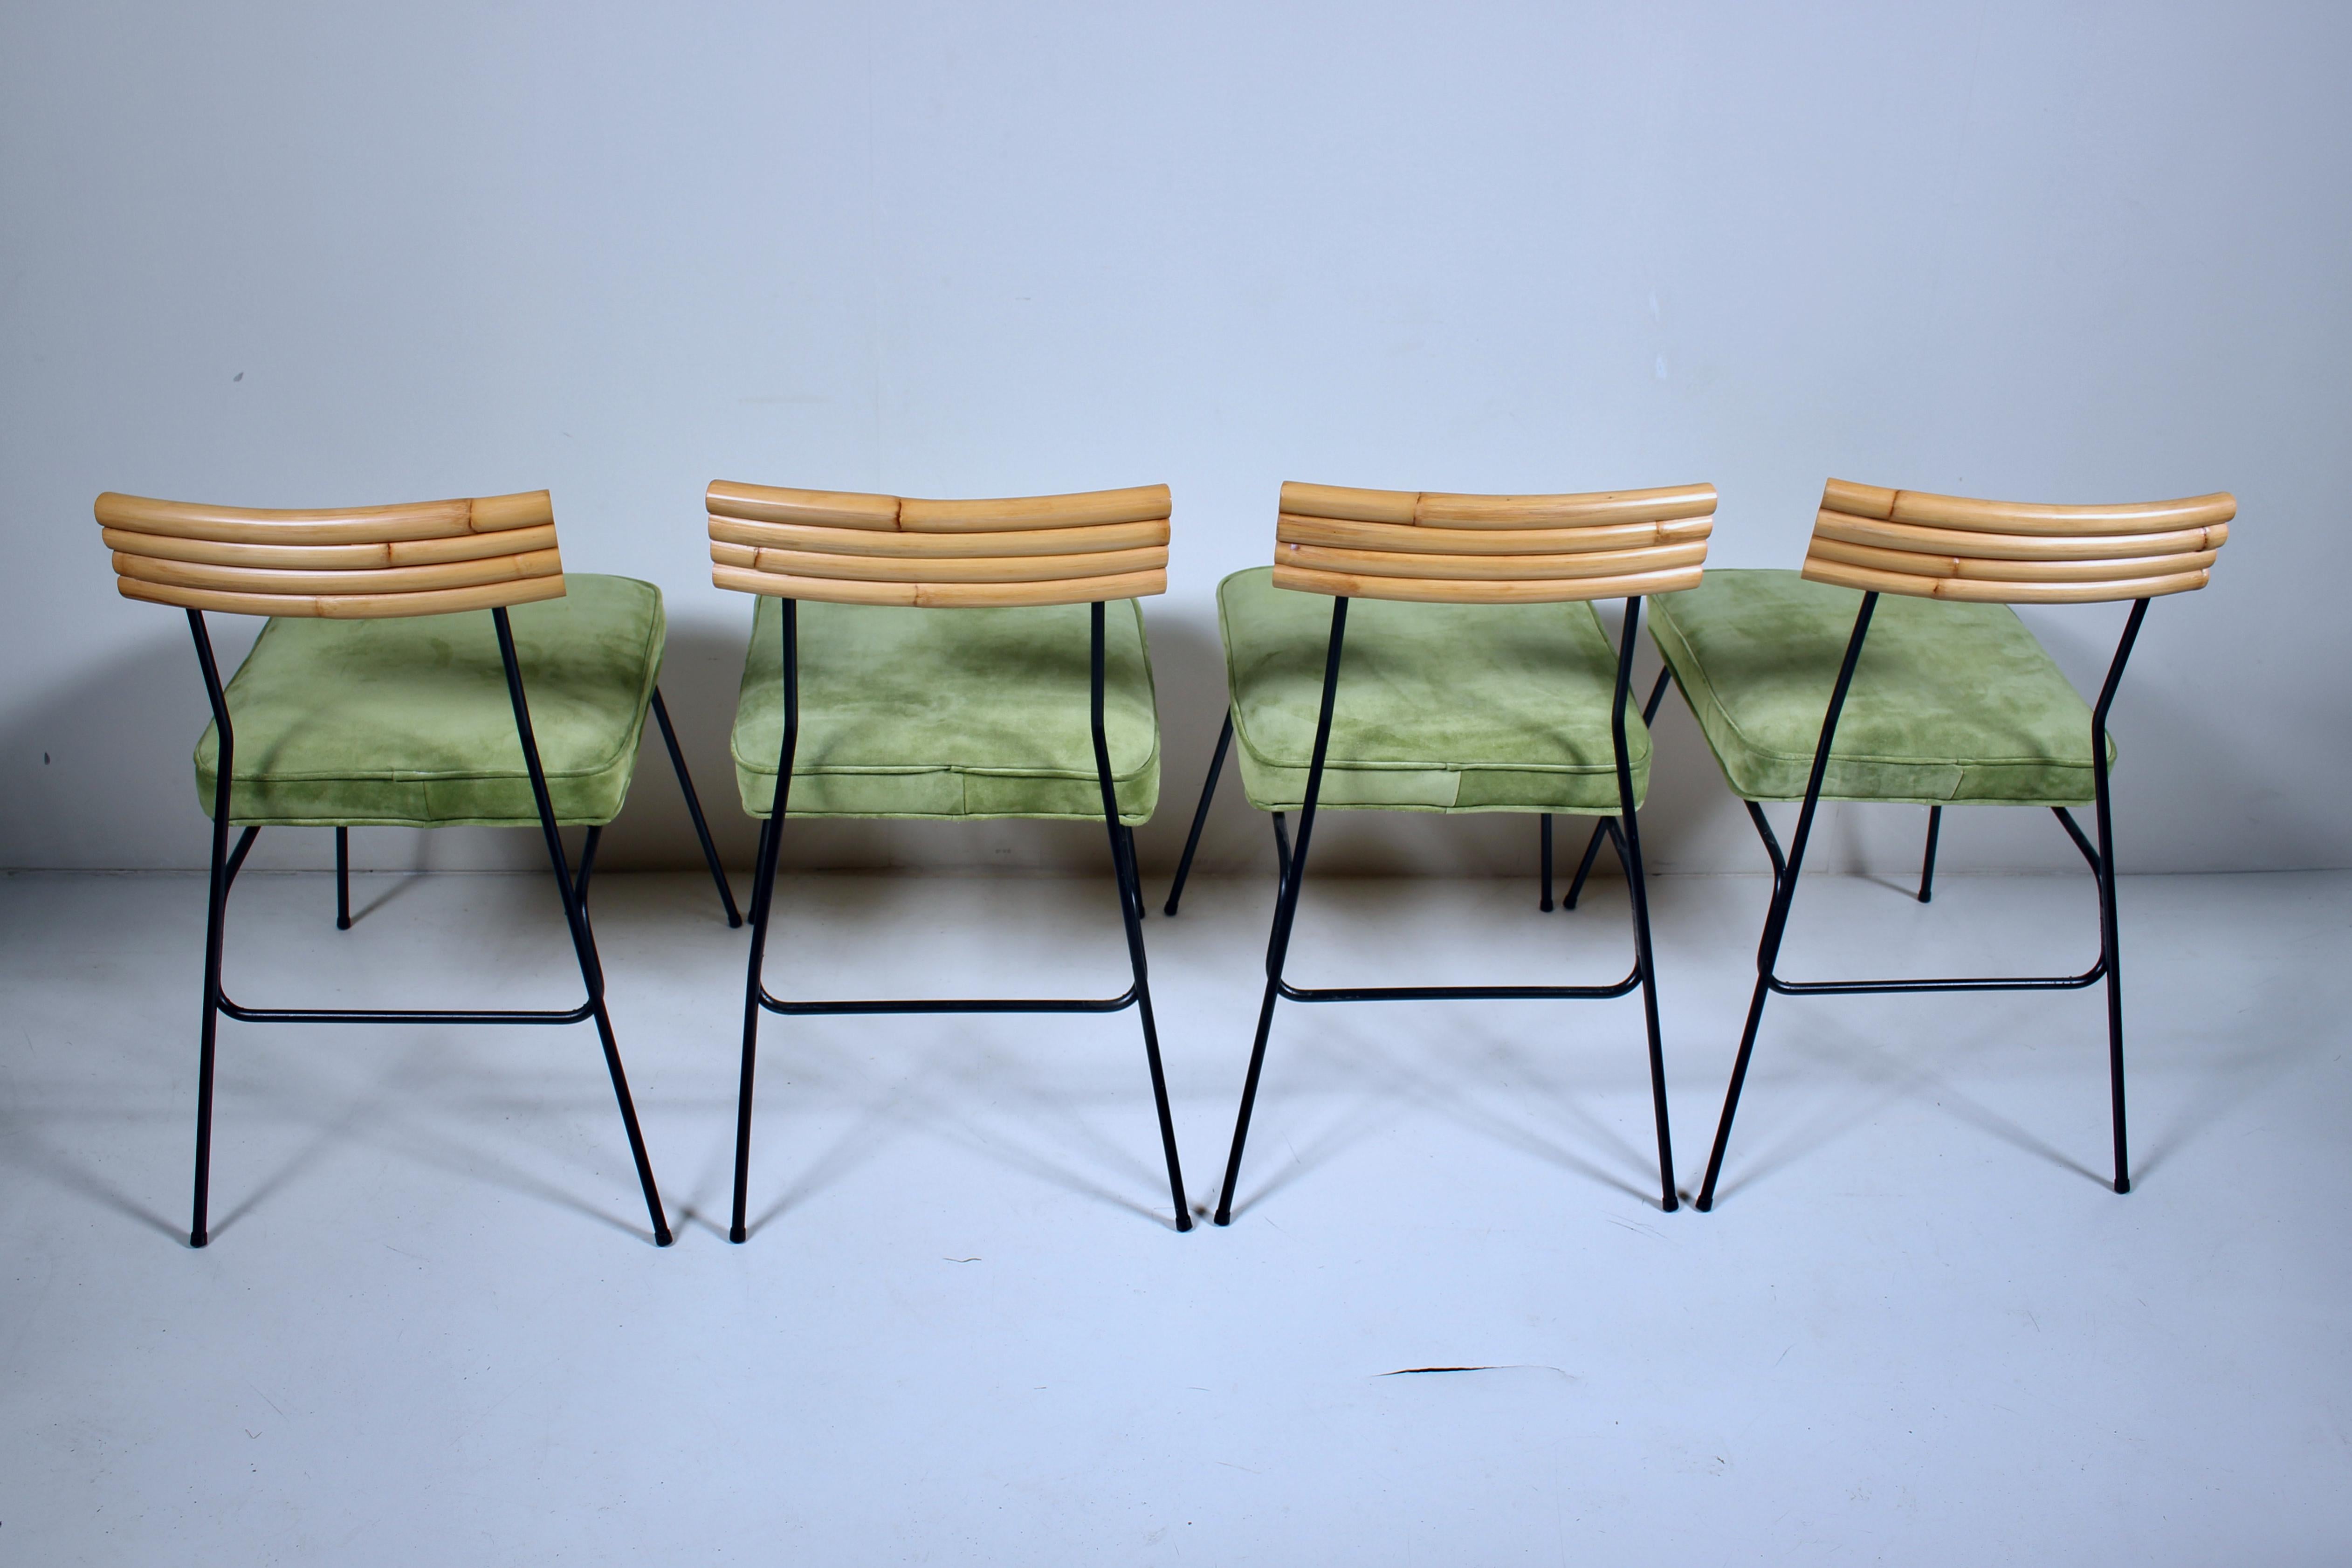 American Set of 4 Herb & Shirley Ritts Iron, Bamboo & Suede Dining Side Chairs, 1950s For Sale